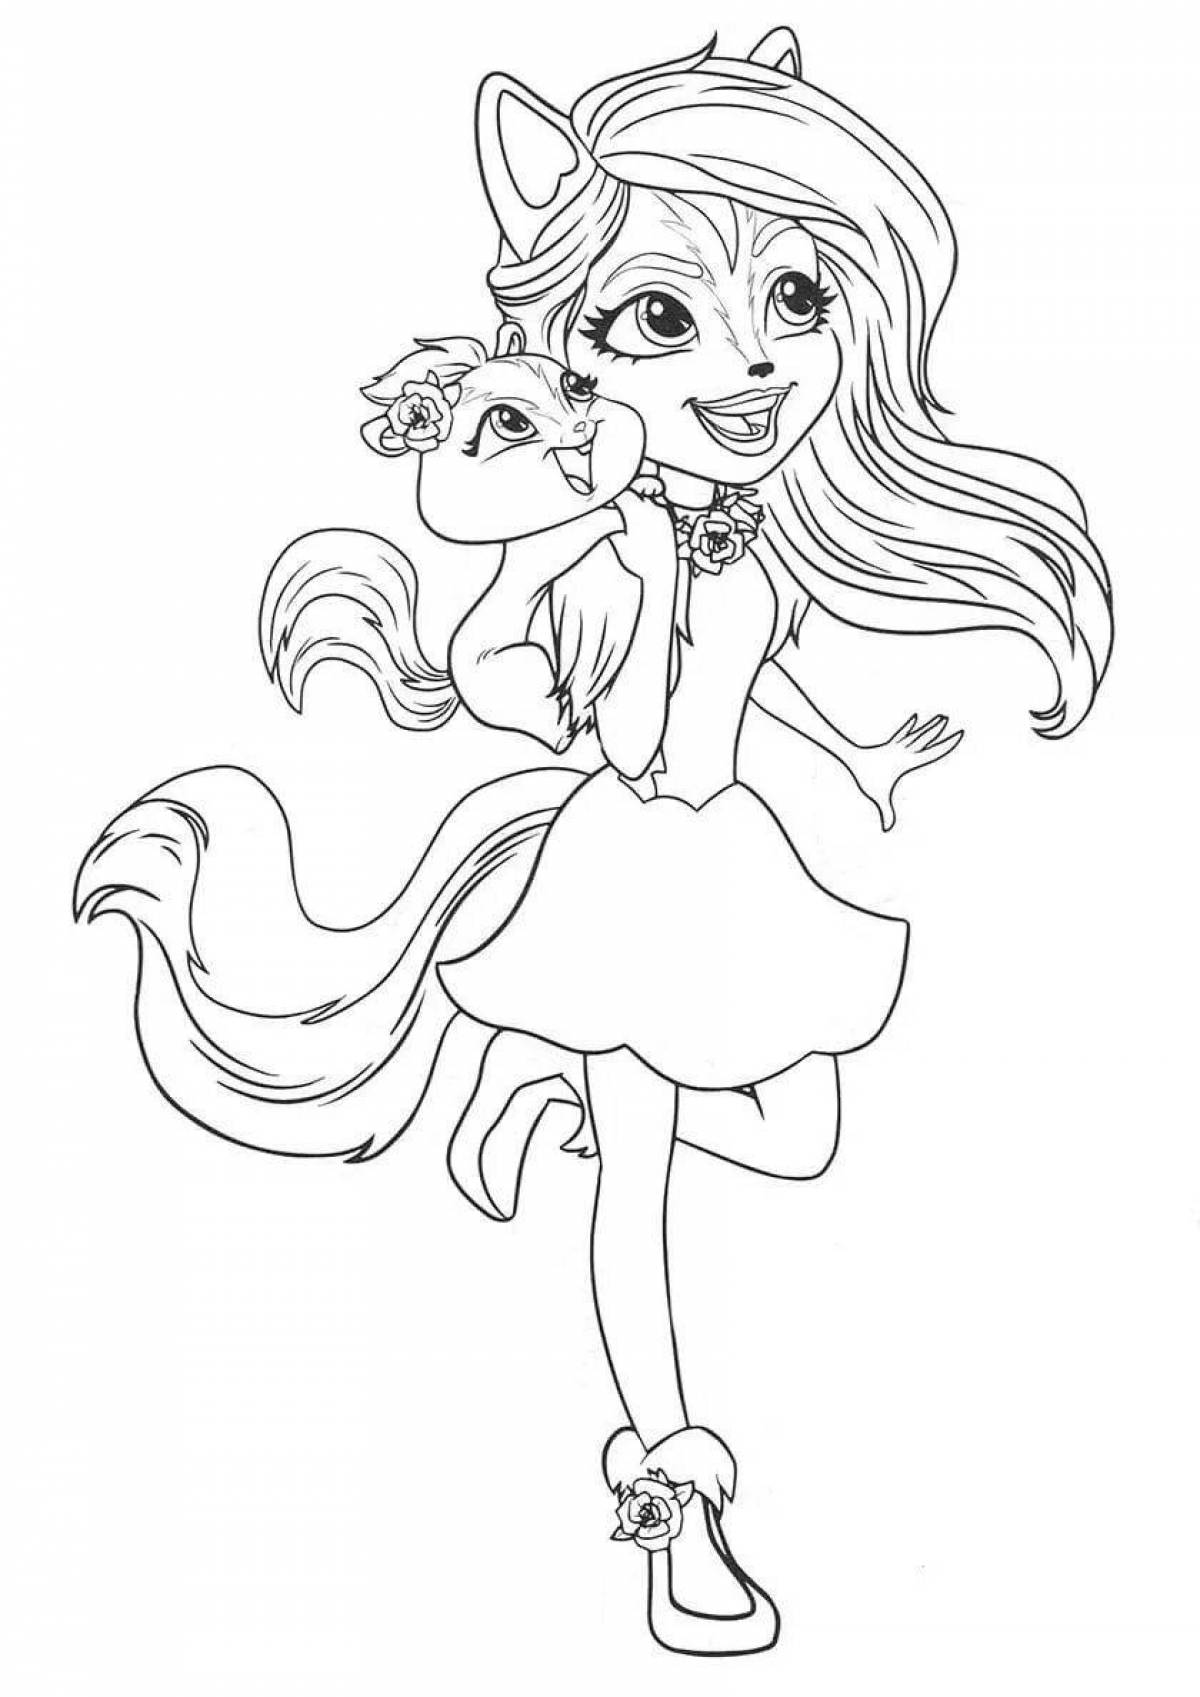 Amazing cat enchantimals coloring pages